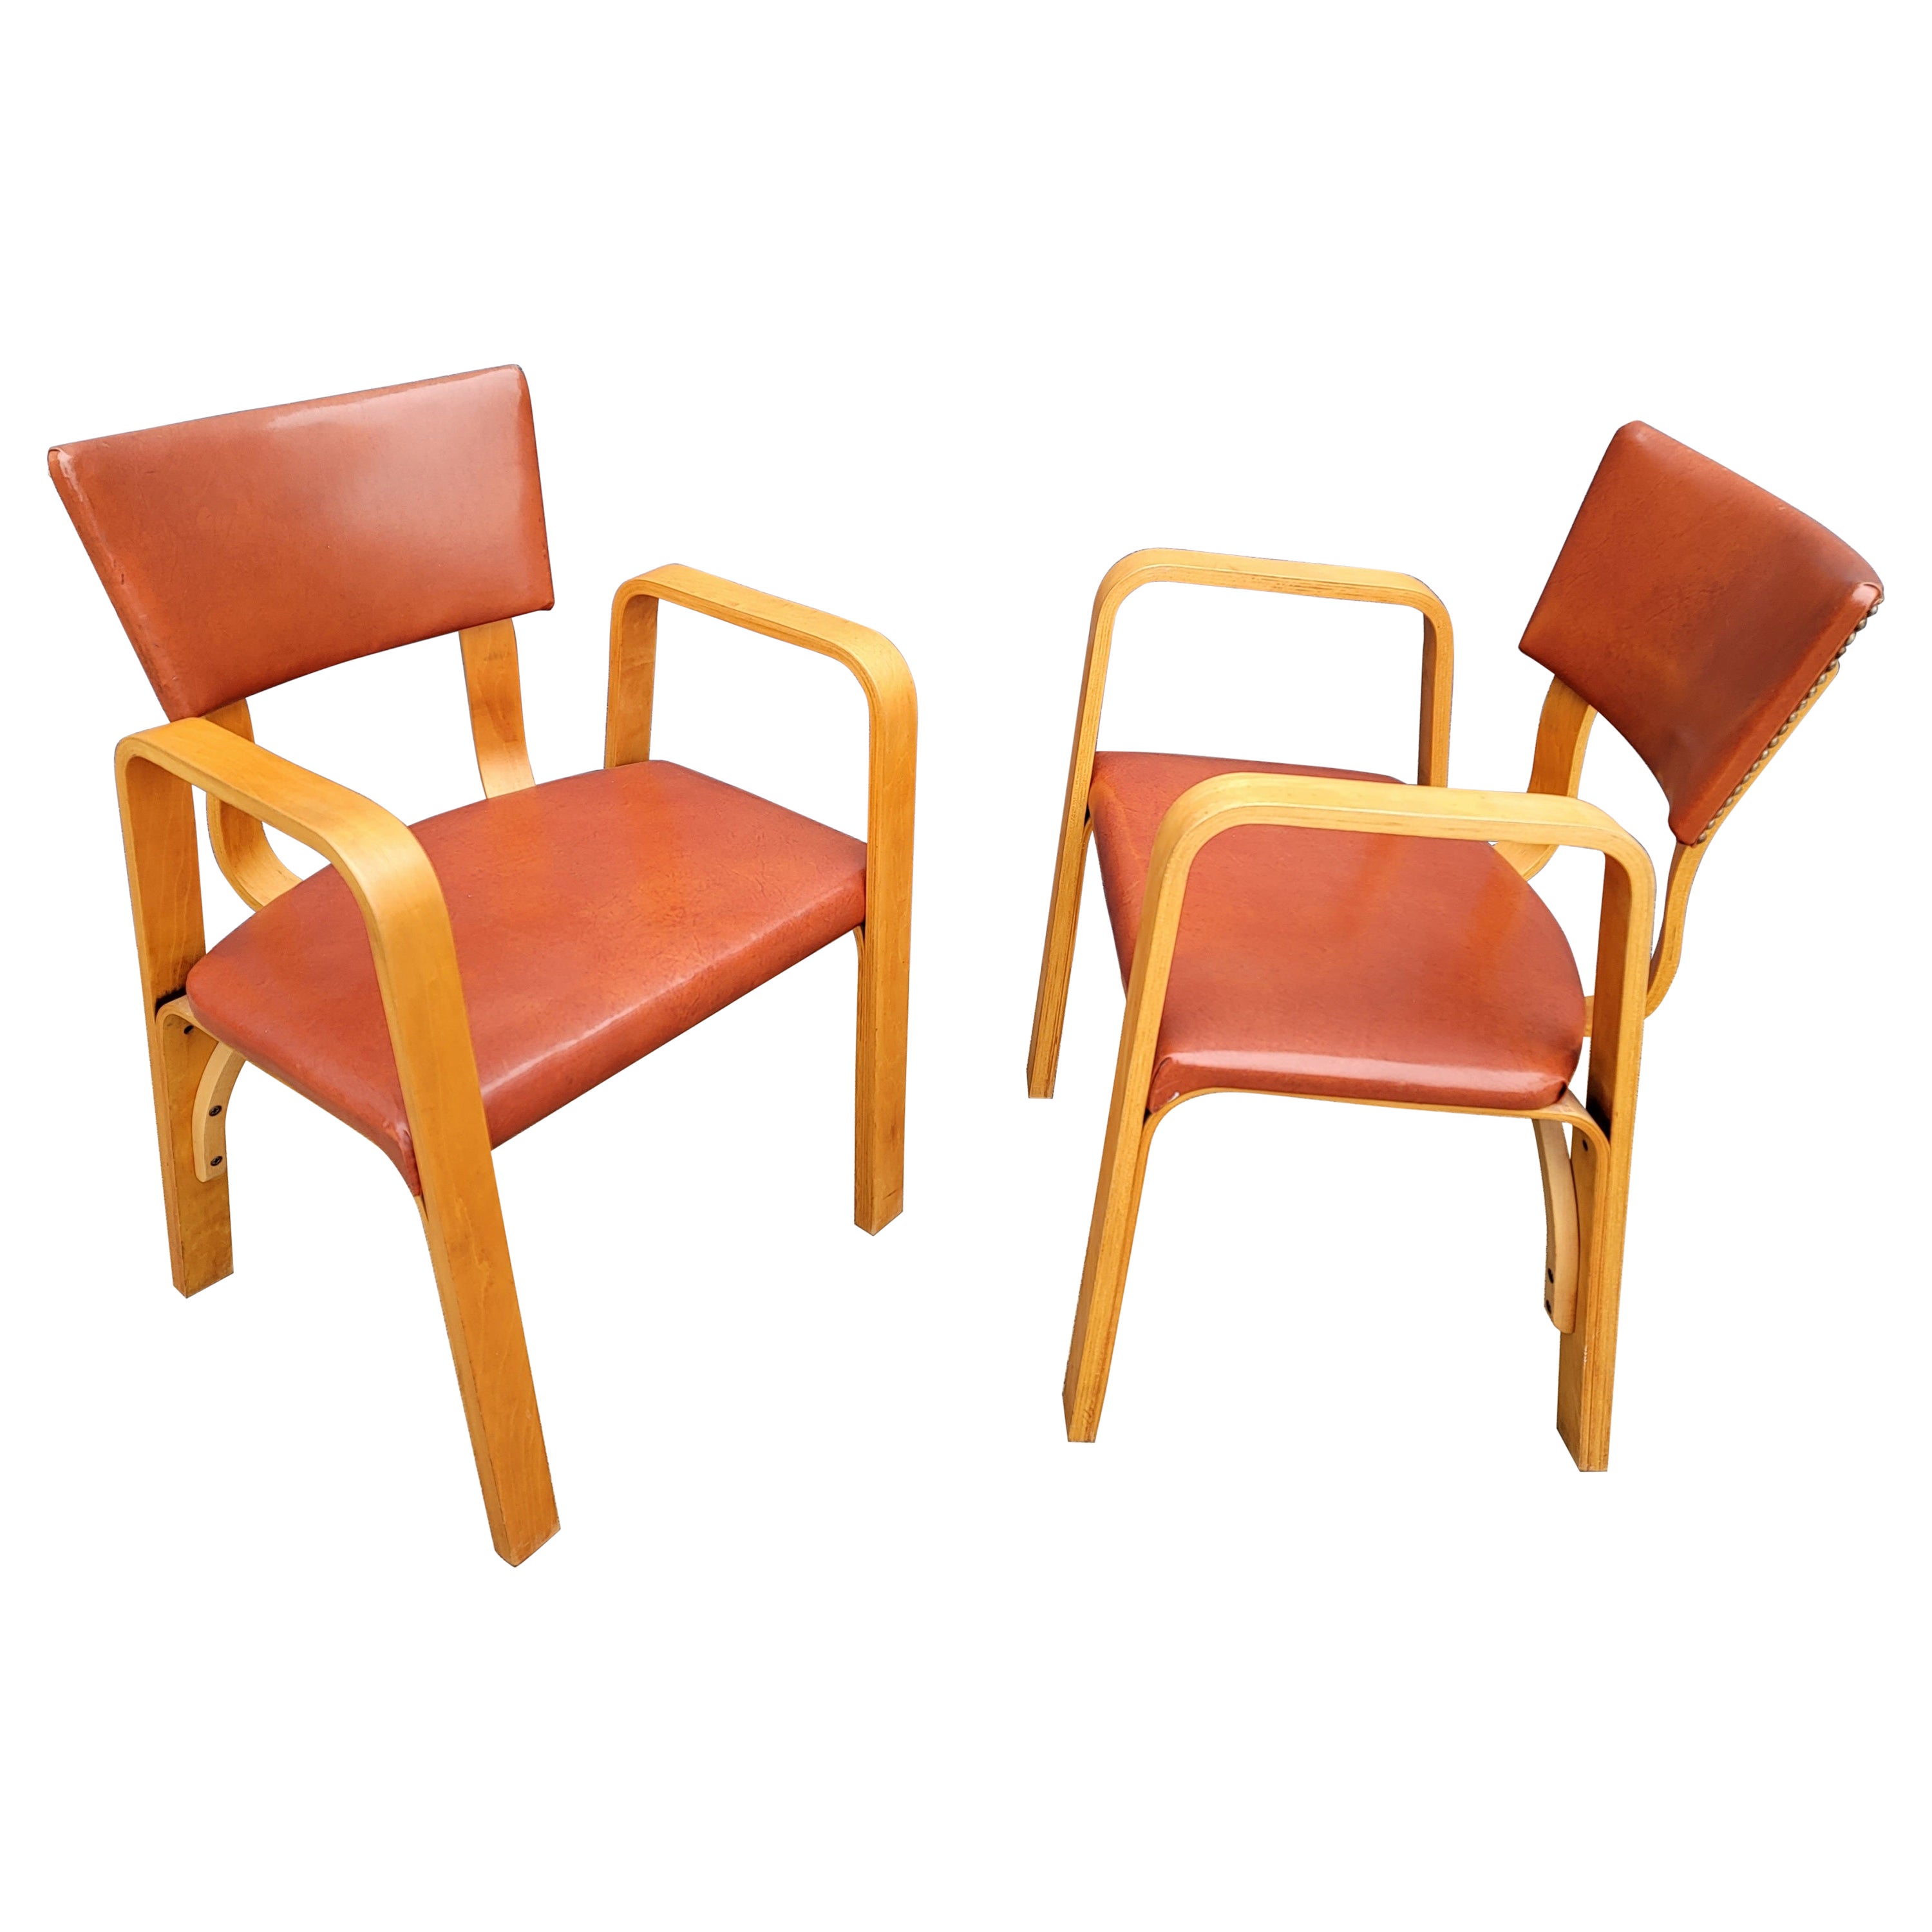 Thonet Bentwood Armchairs, a Pair